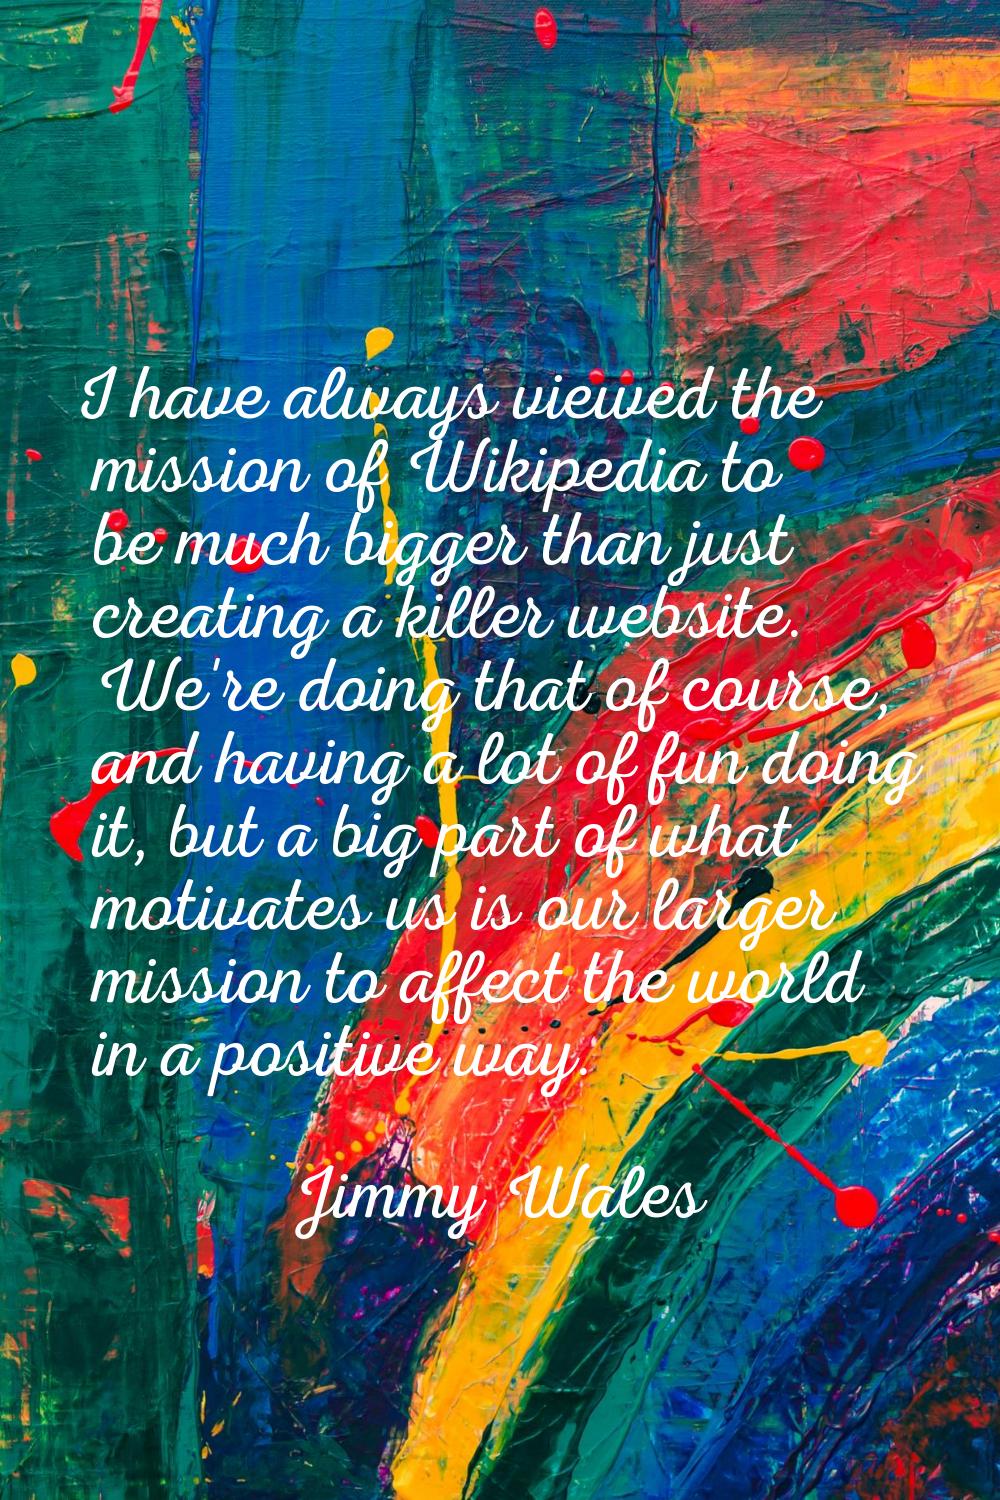 I have always viewed the mission of Wikipedia to be much bigger than just creating a killer website